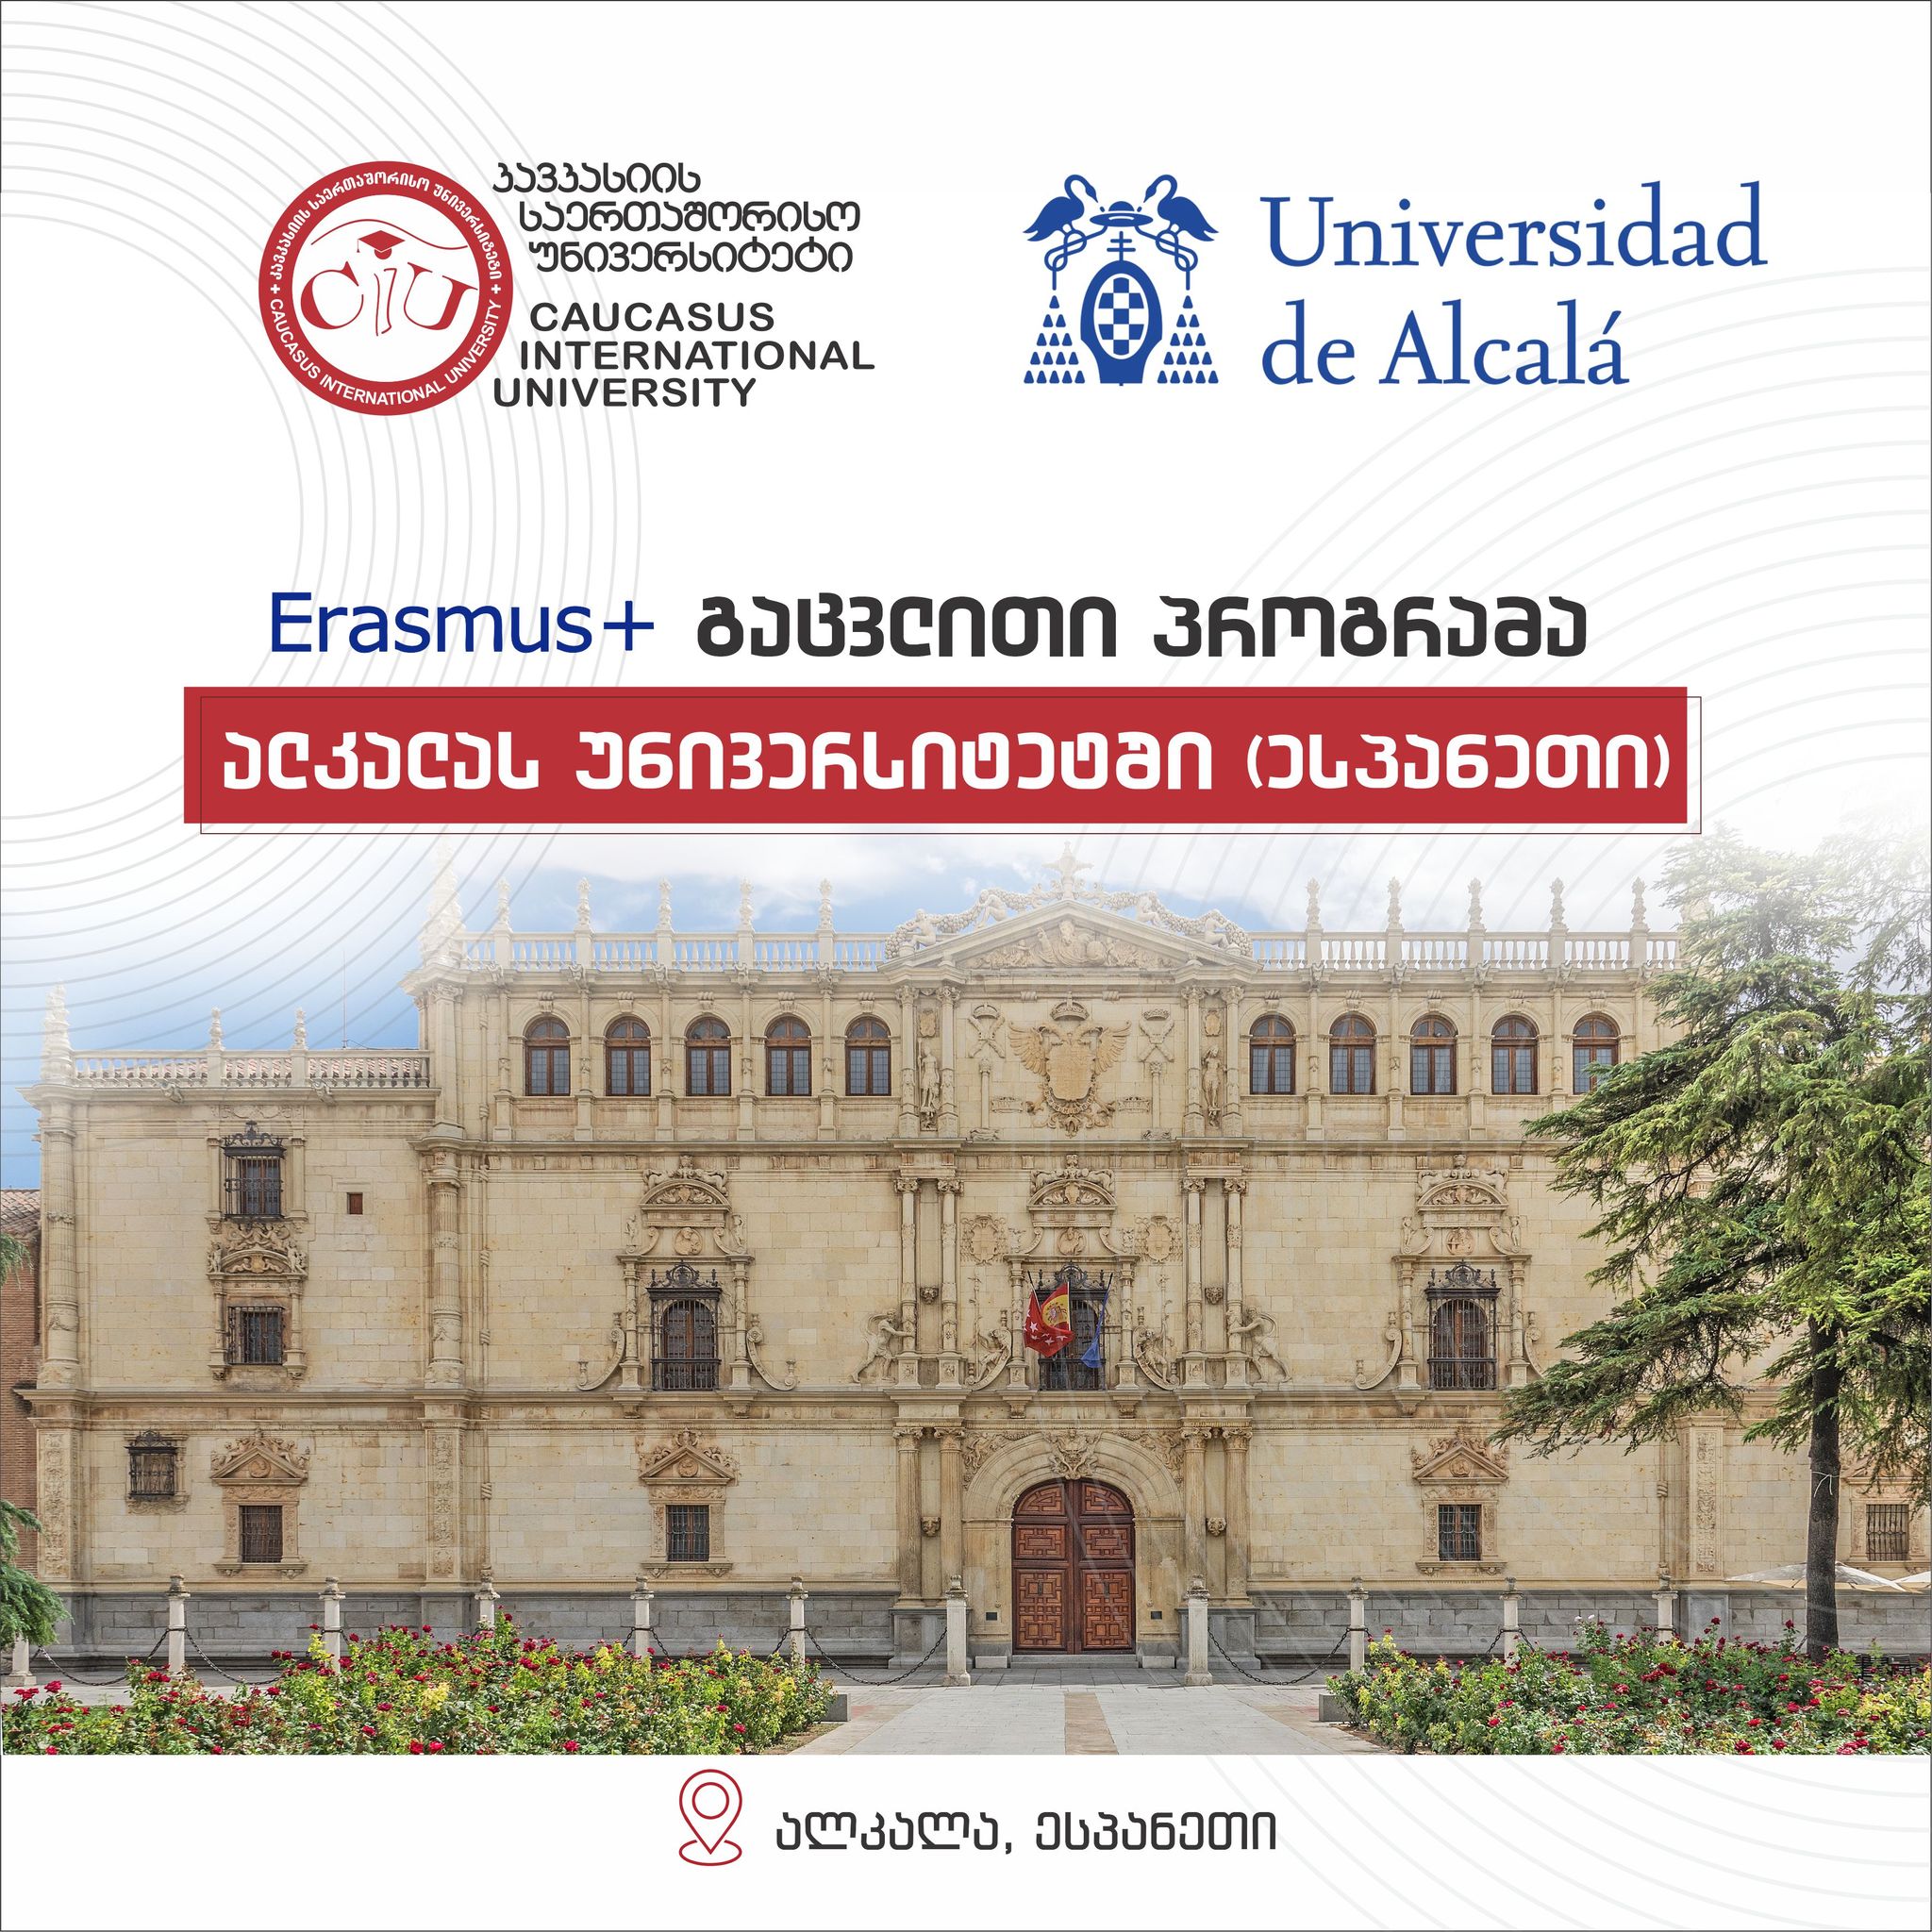 CIU is pleased to announce the admission of students for a semester exchange program at partner Alcala University (Spain)